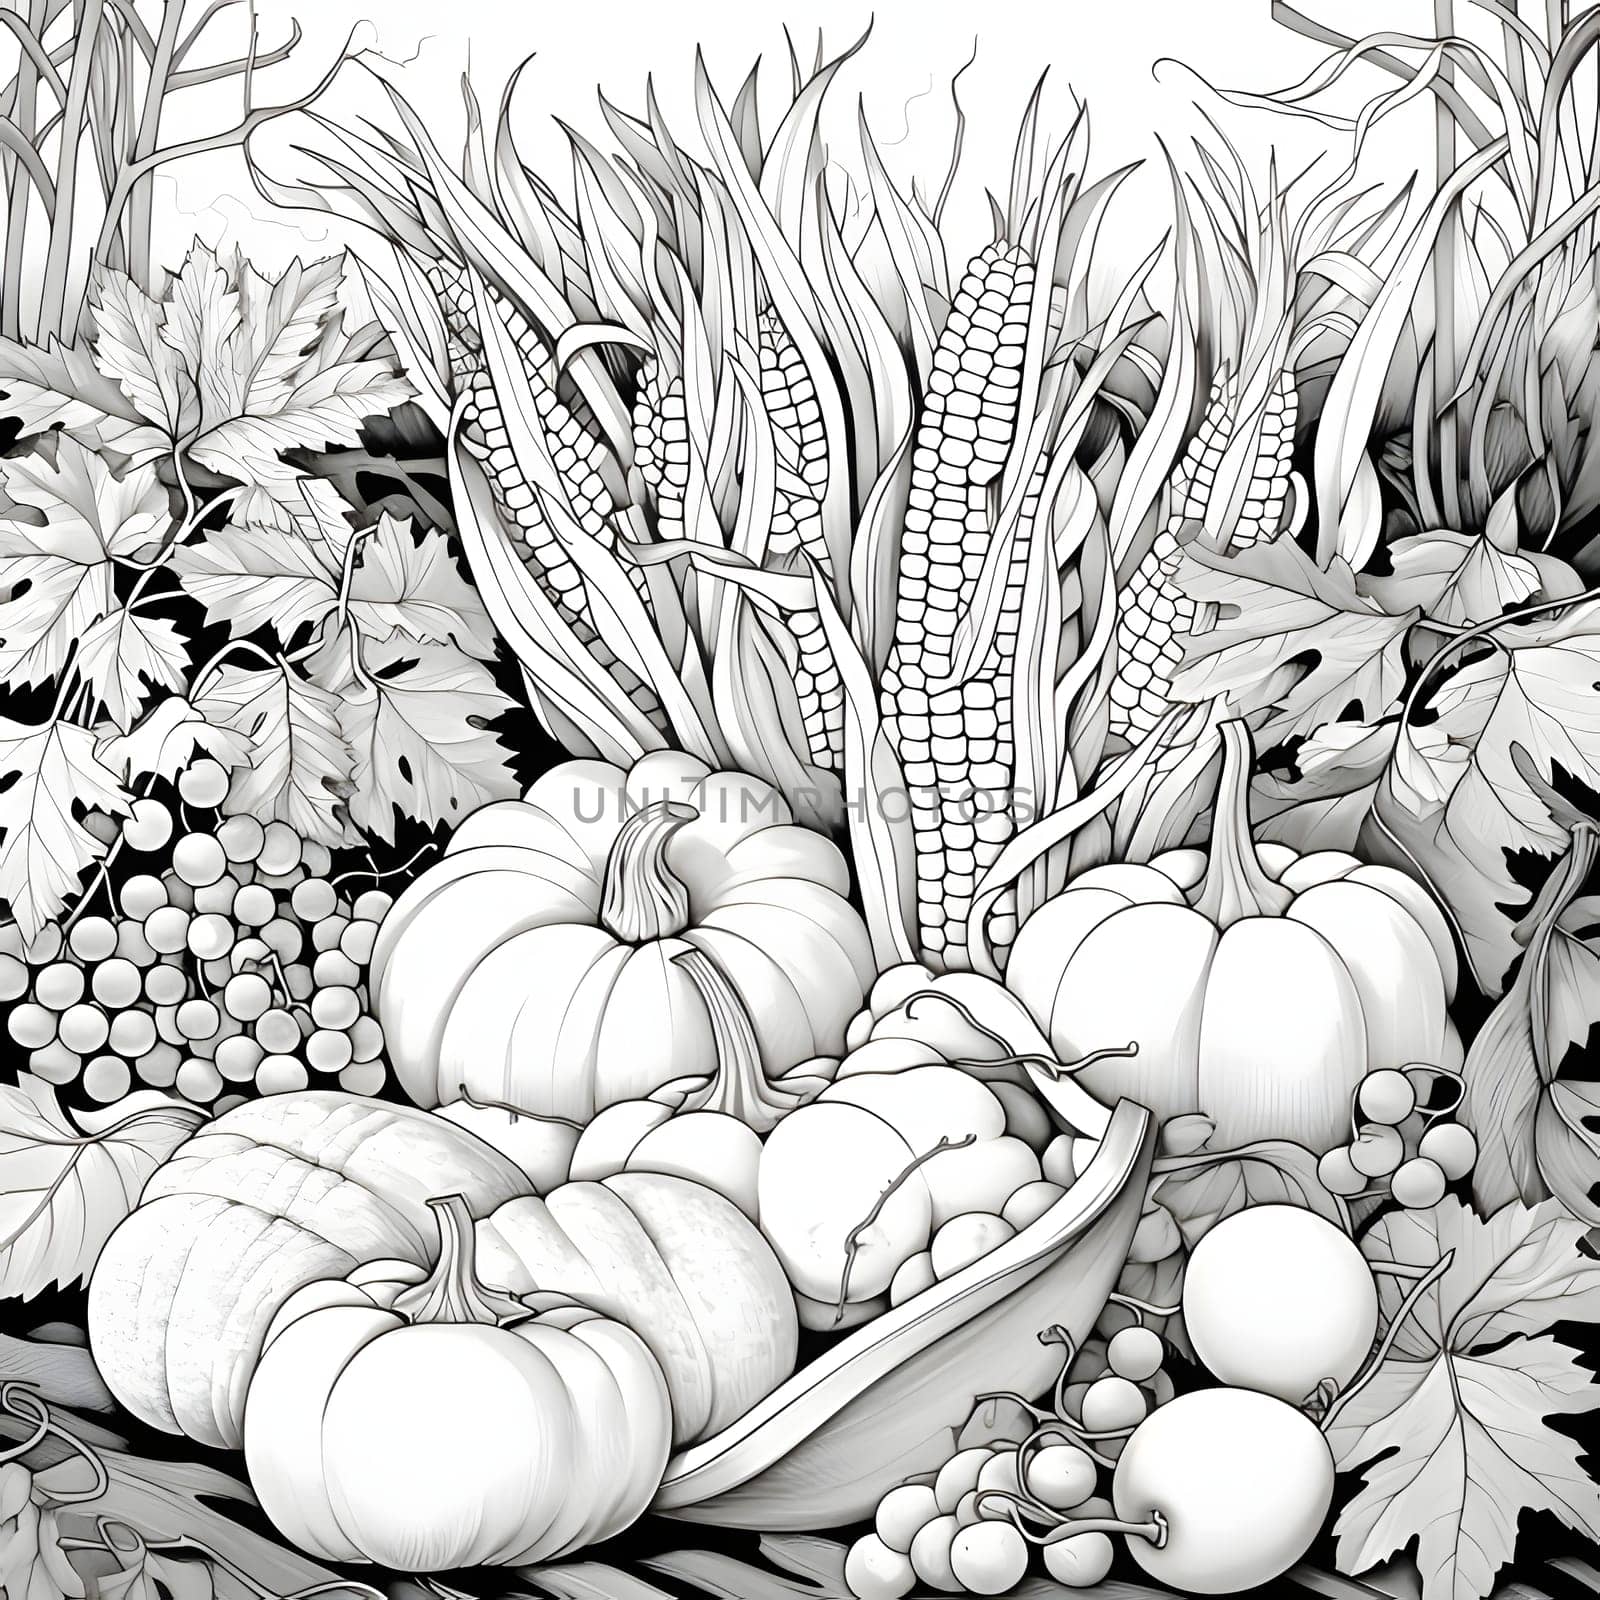 Black and White coloring book, harvest from the field corn grapes, pumpkin leaves. Pumpkin as a dish of thanksgiving for the harvest, picture on a white isolated background. An atmosphere of joy and celebration.